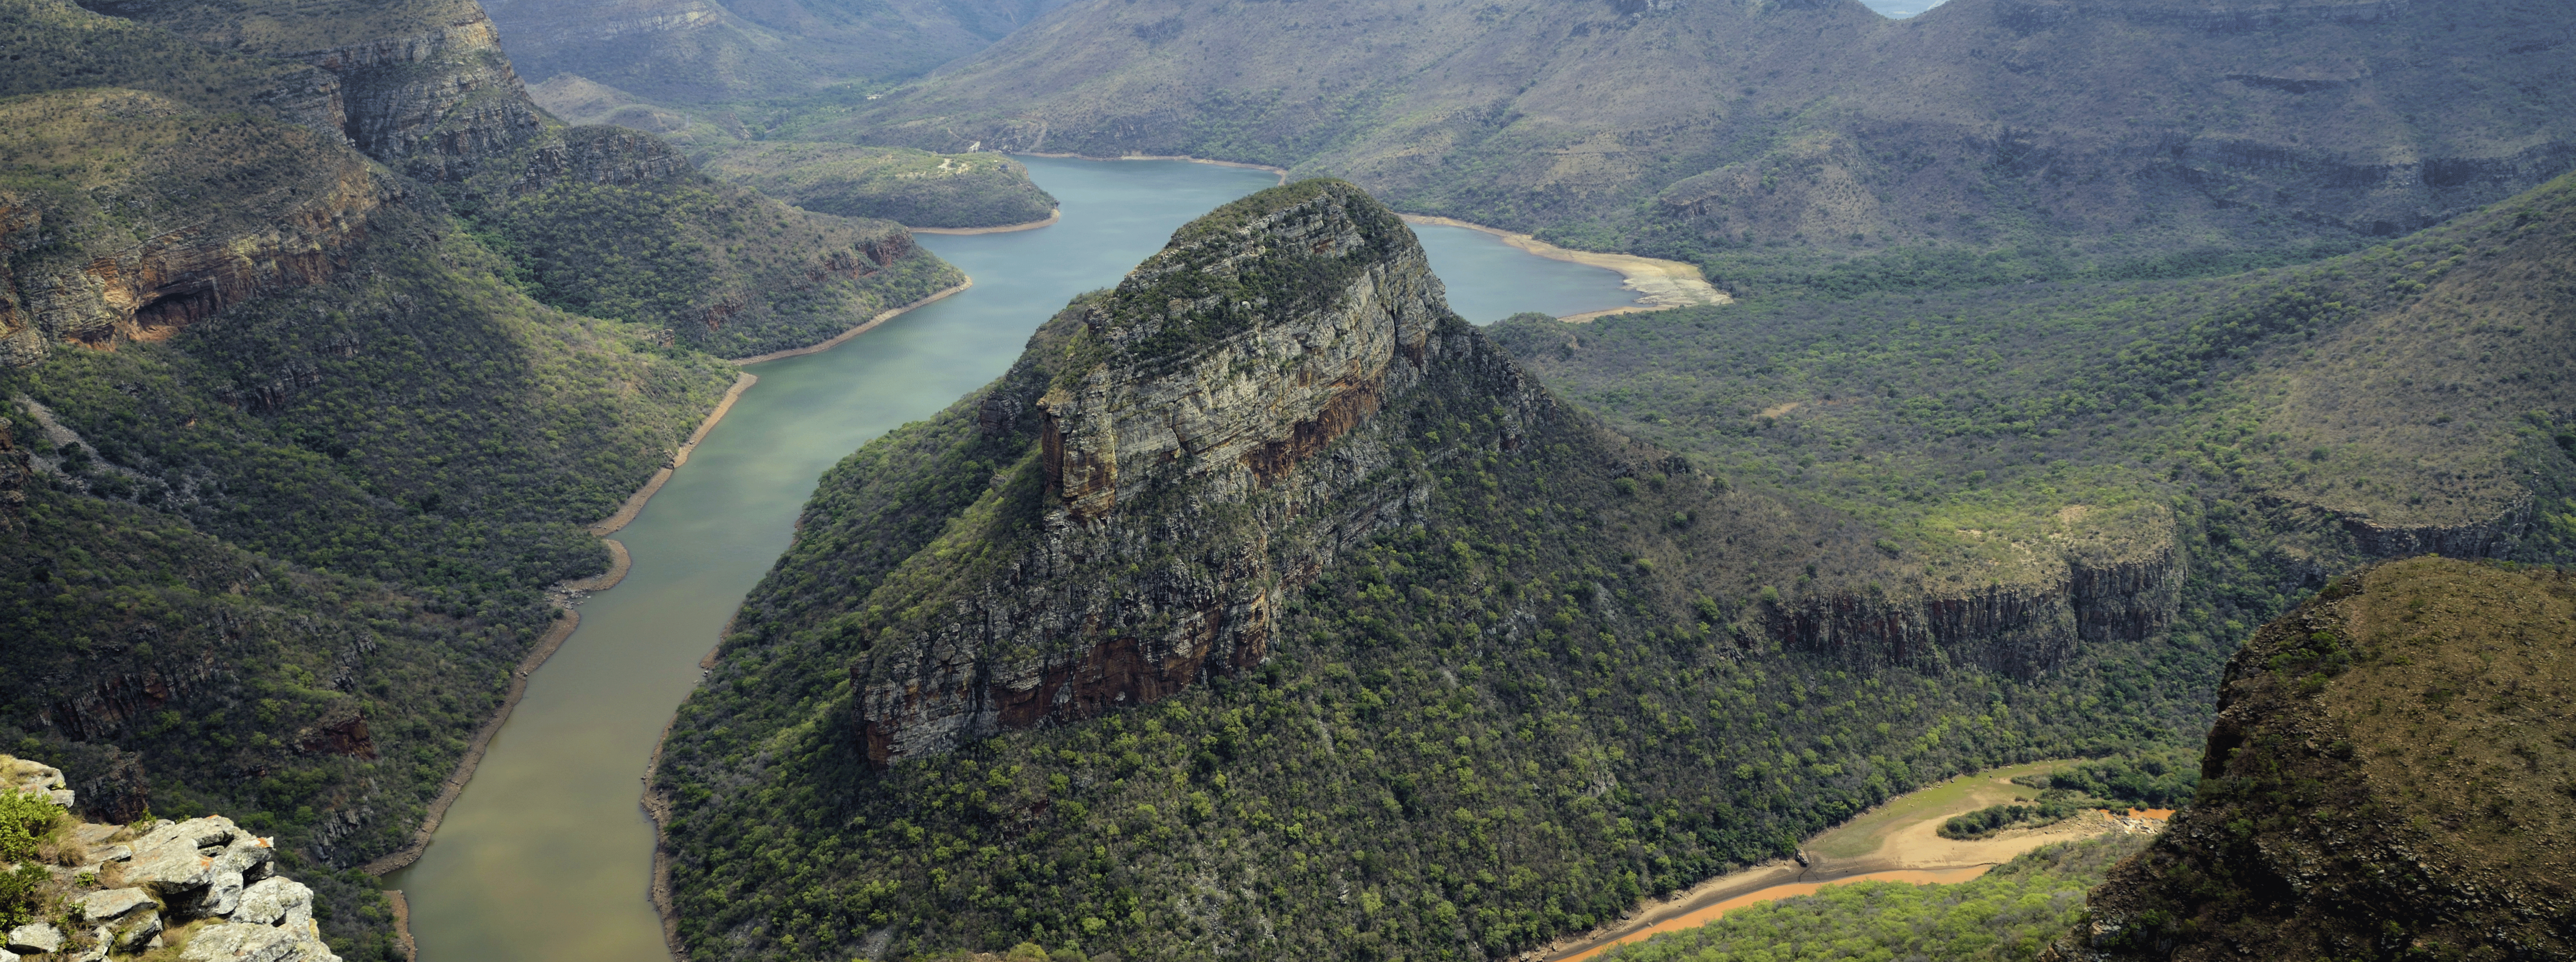 /resource/Images/southafrica/headerimage/Blyde-River-Canyon-South-Africa.png